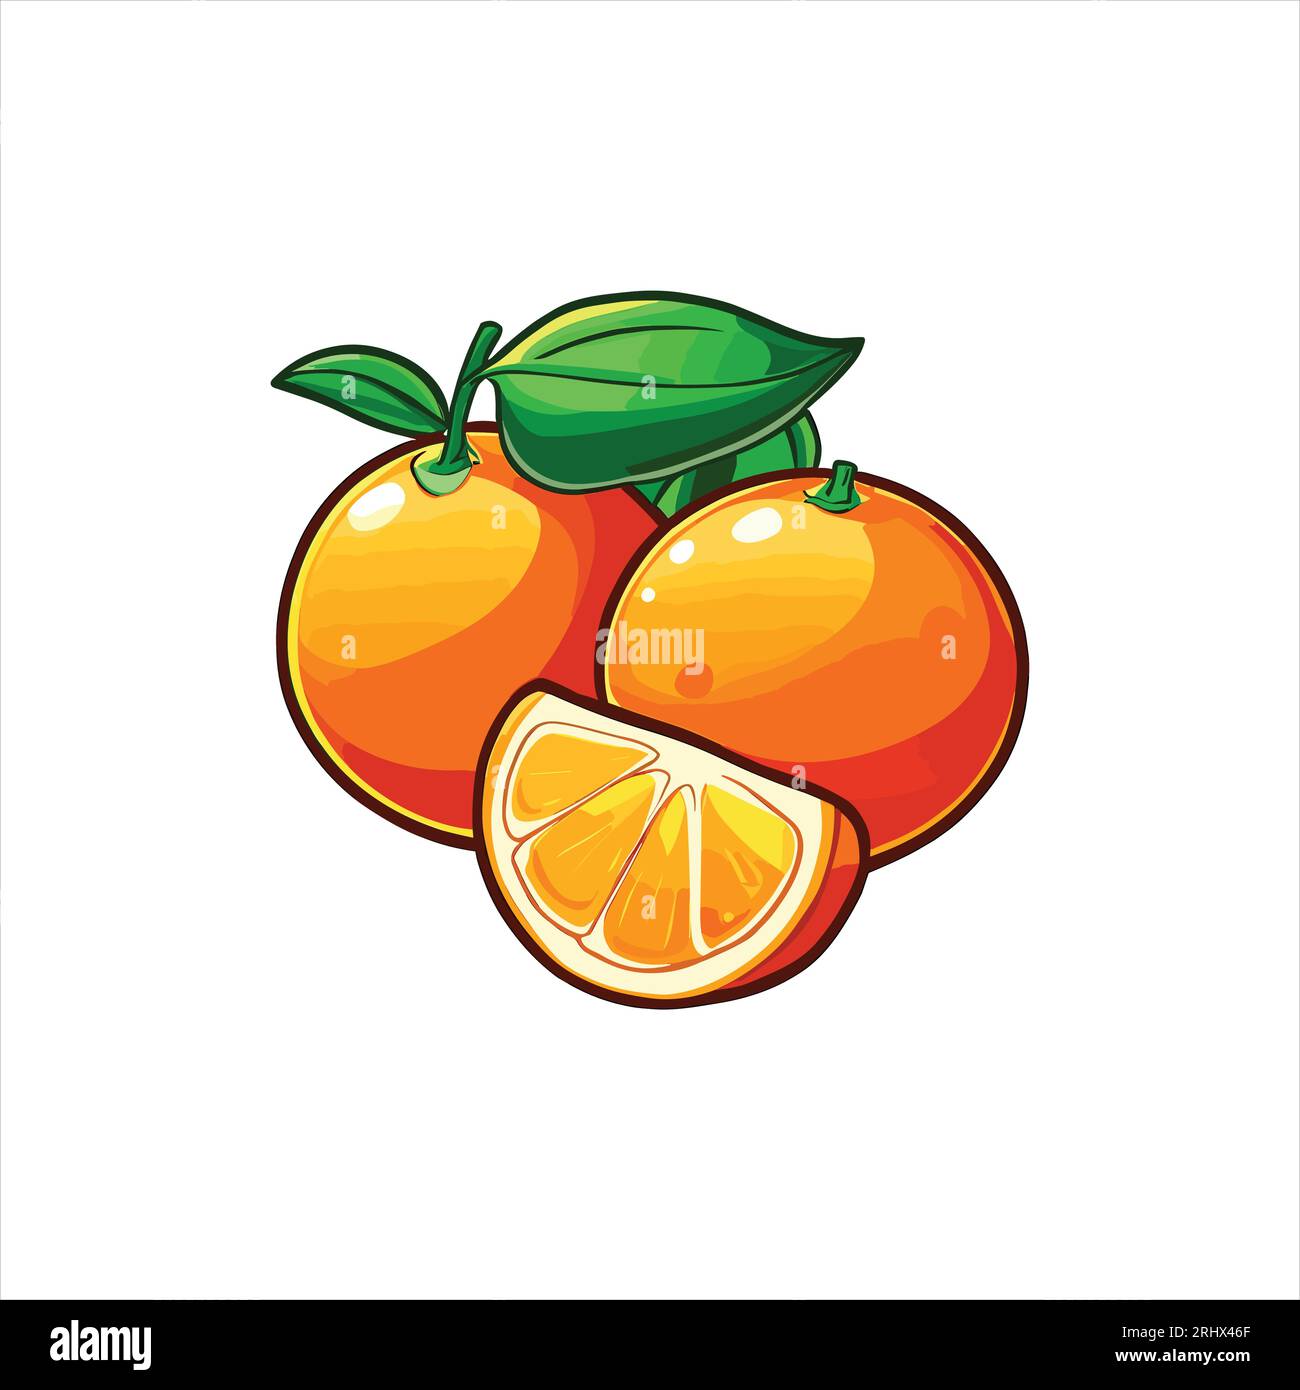 Clipart vector illustration of oranges Stock Vector